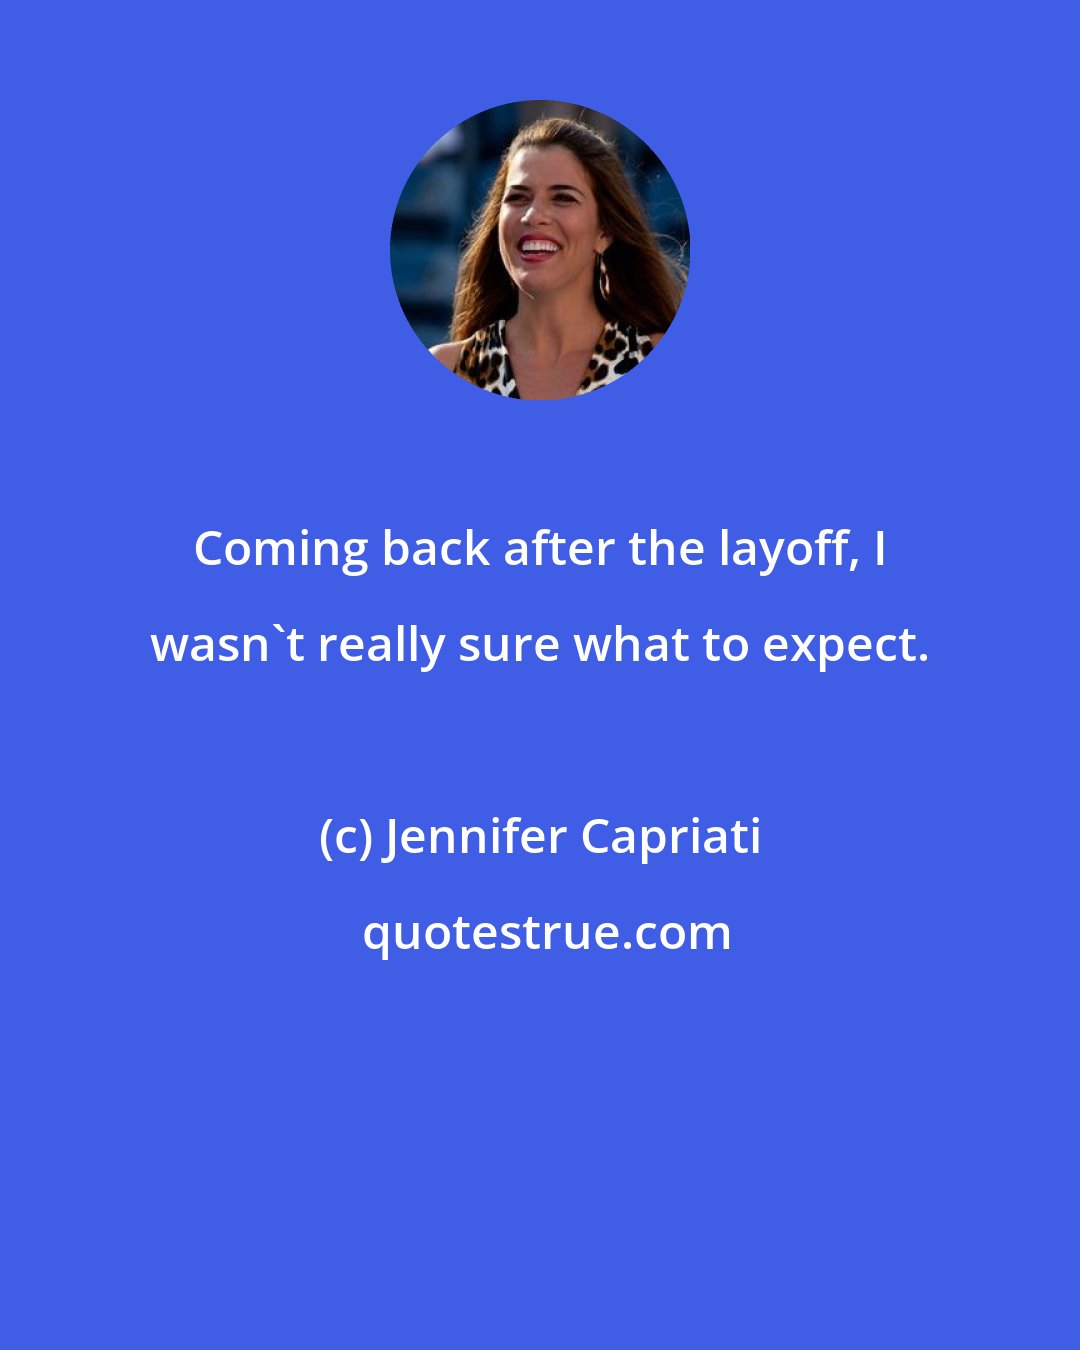 Jennifer Capriati: Coming back after the layoff, I wasn't really sure what to expect.